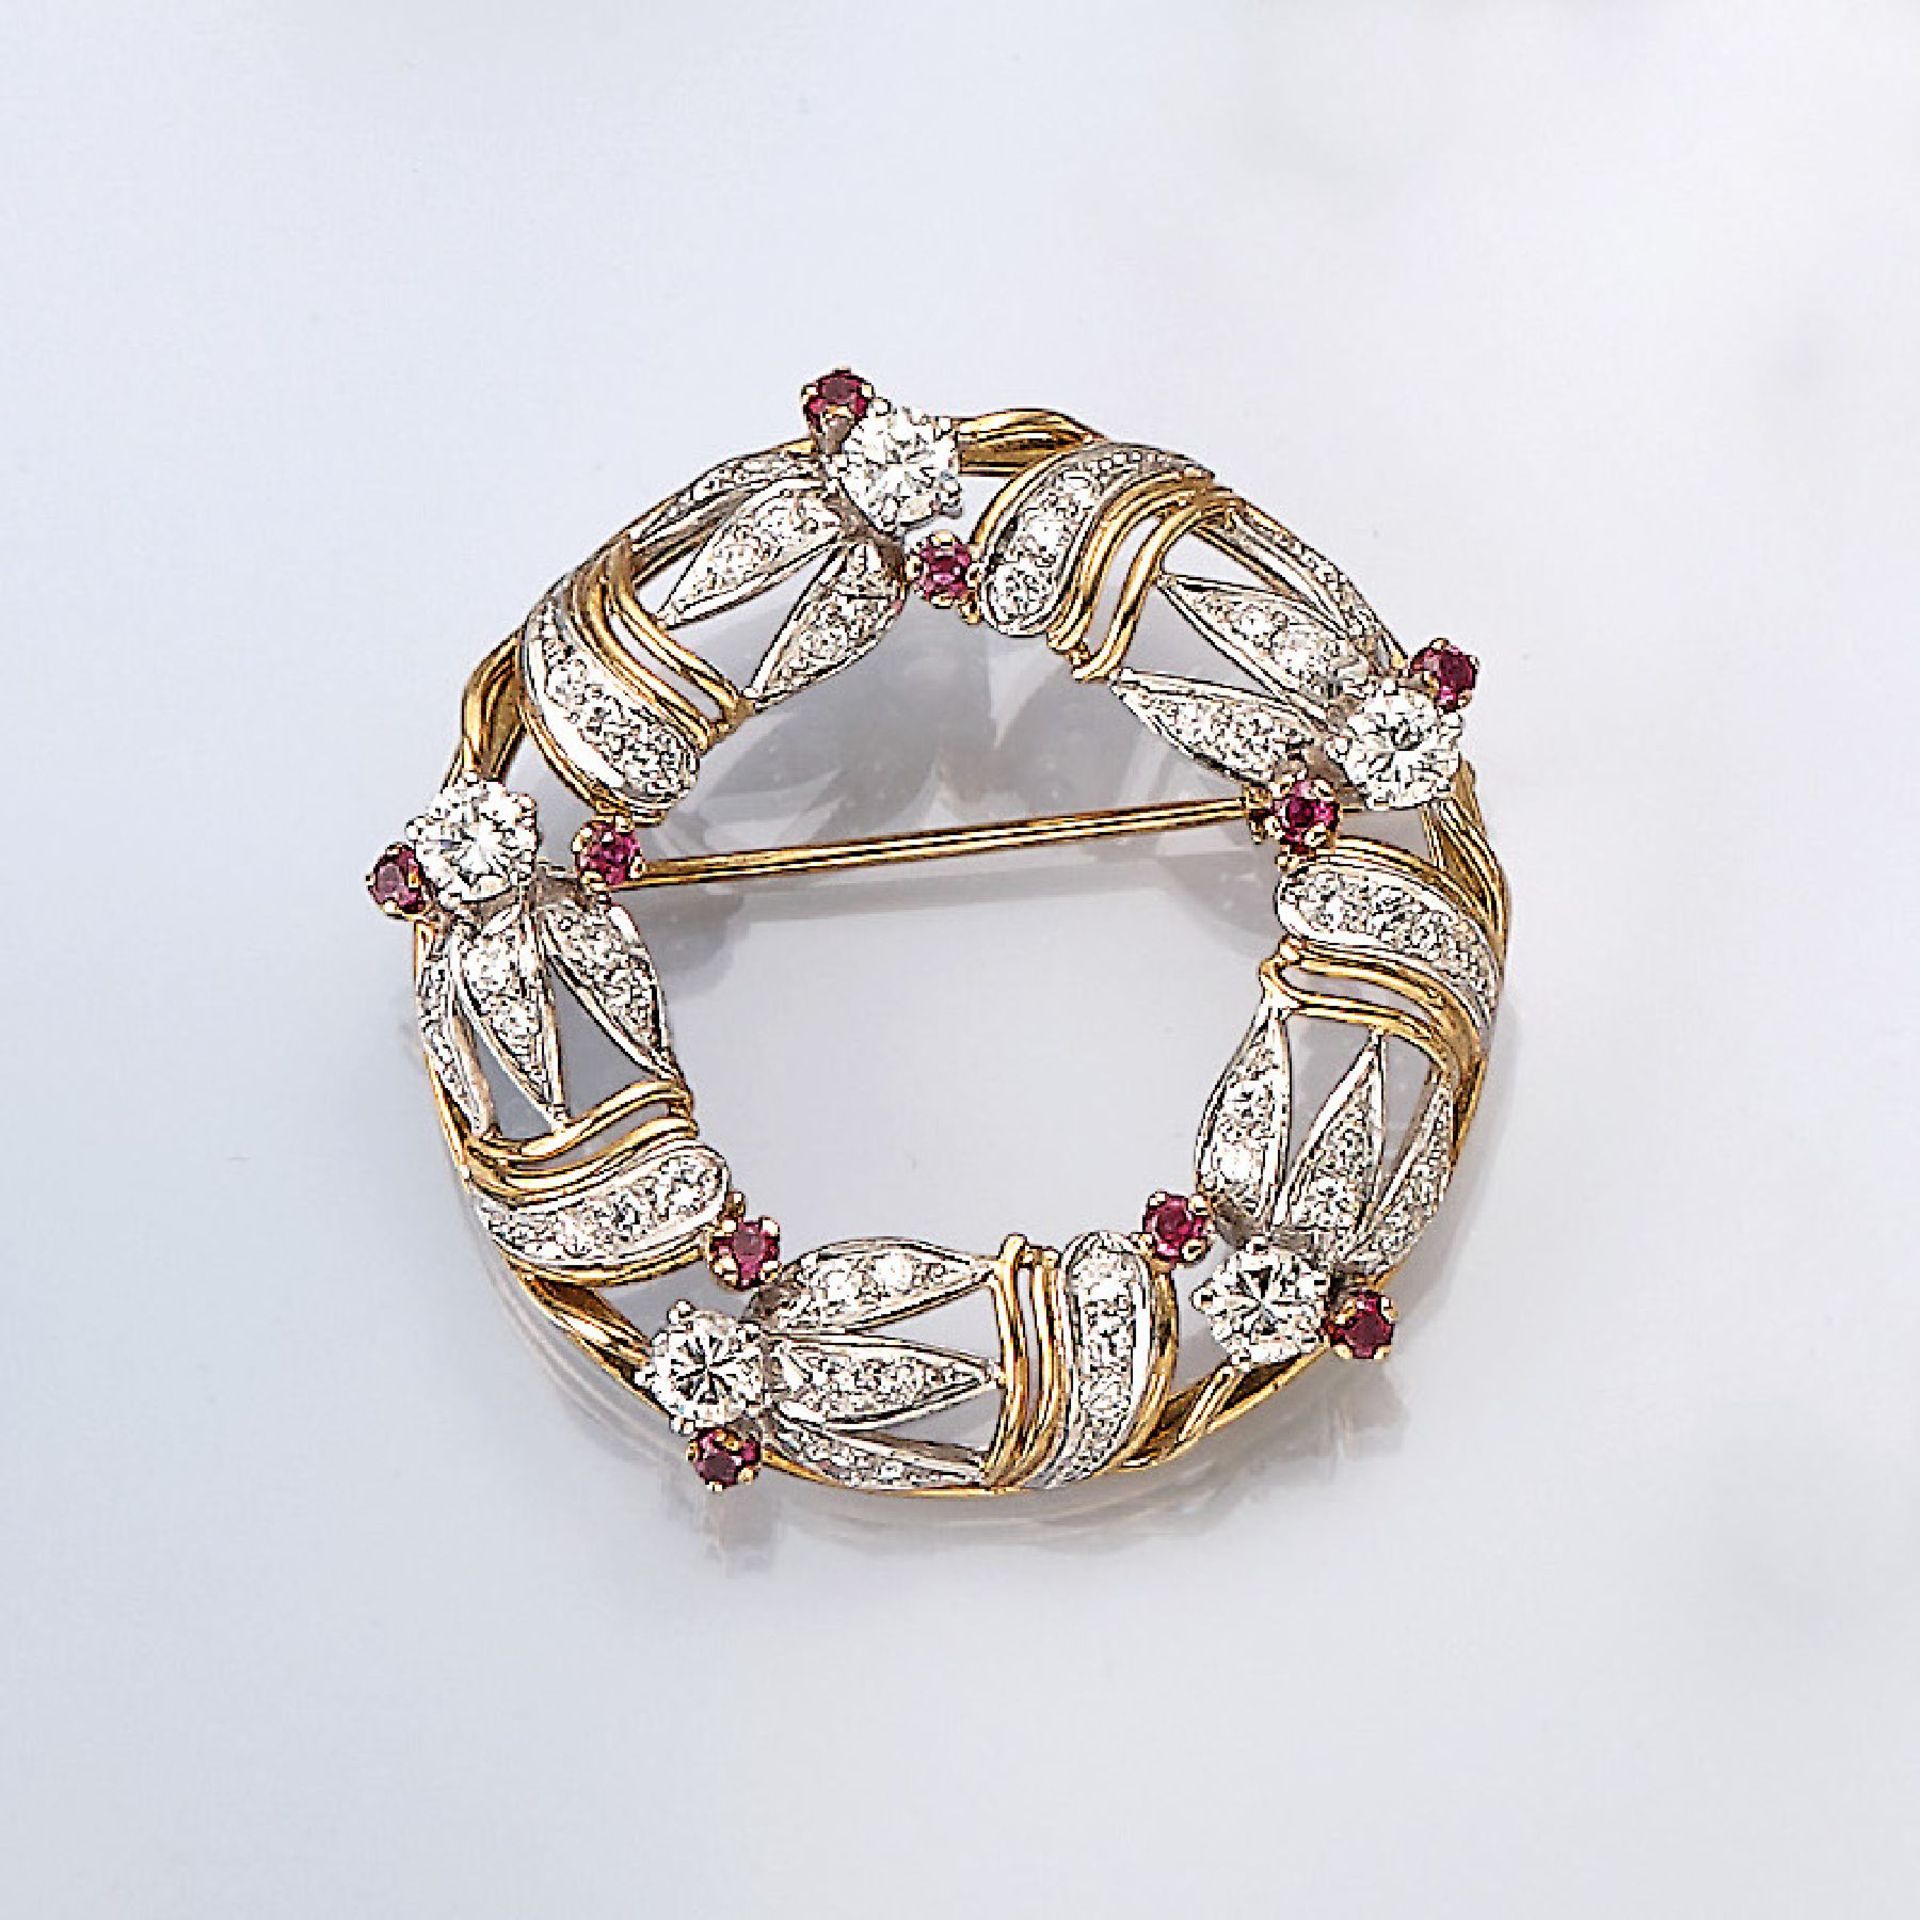 14 kt gold brooch with rubies and brilliants , YG/WG 585/000, 10 round bevelled rubies total approx.